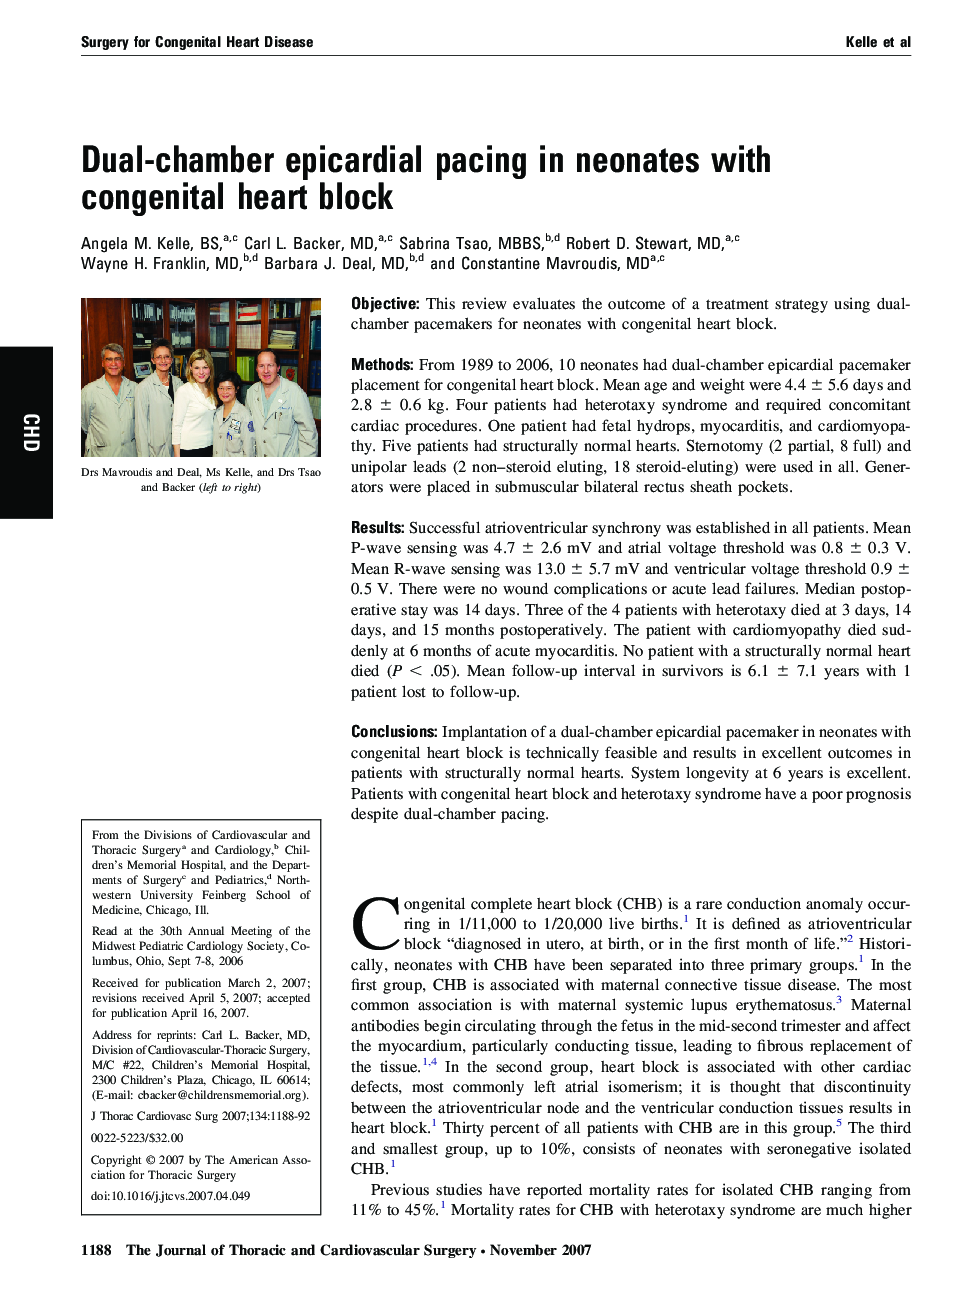 Dual-chamber epicardial pacing in neonates with congenital heart block 